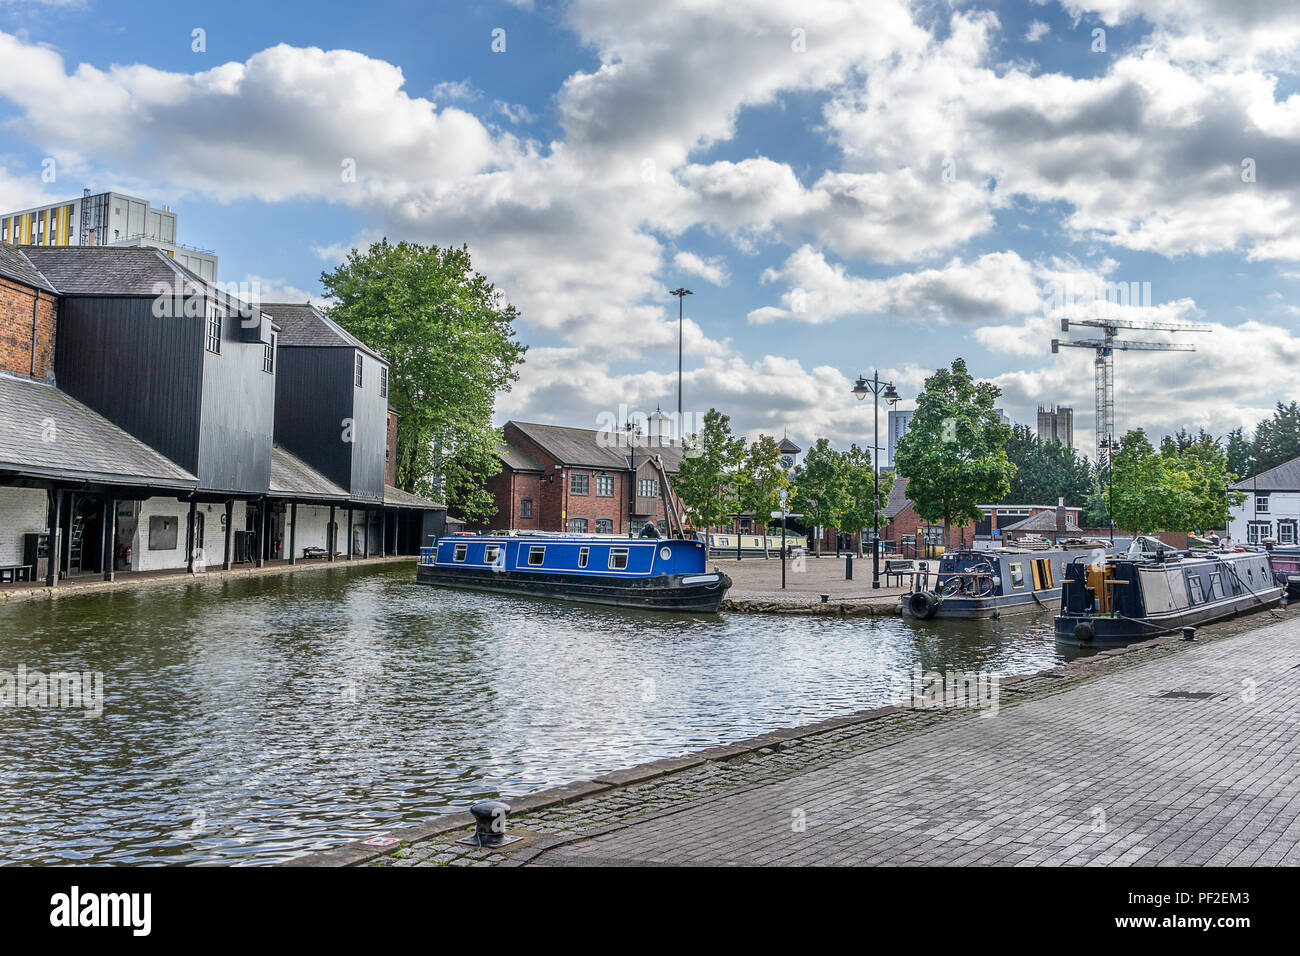 Canal Basin in Coventry, England Stockfoto